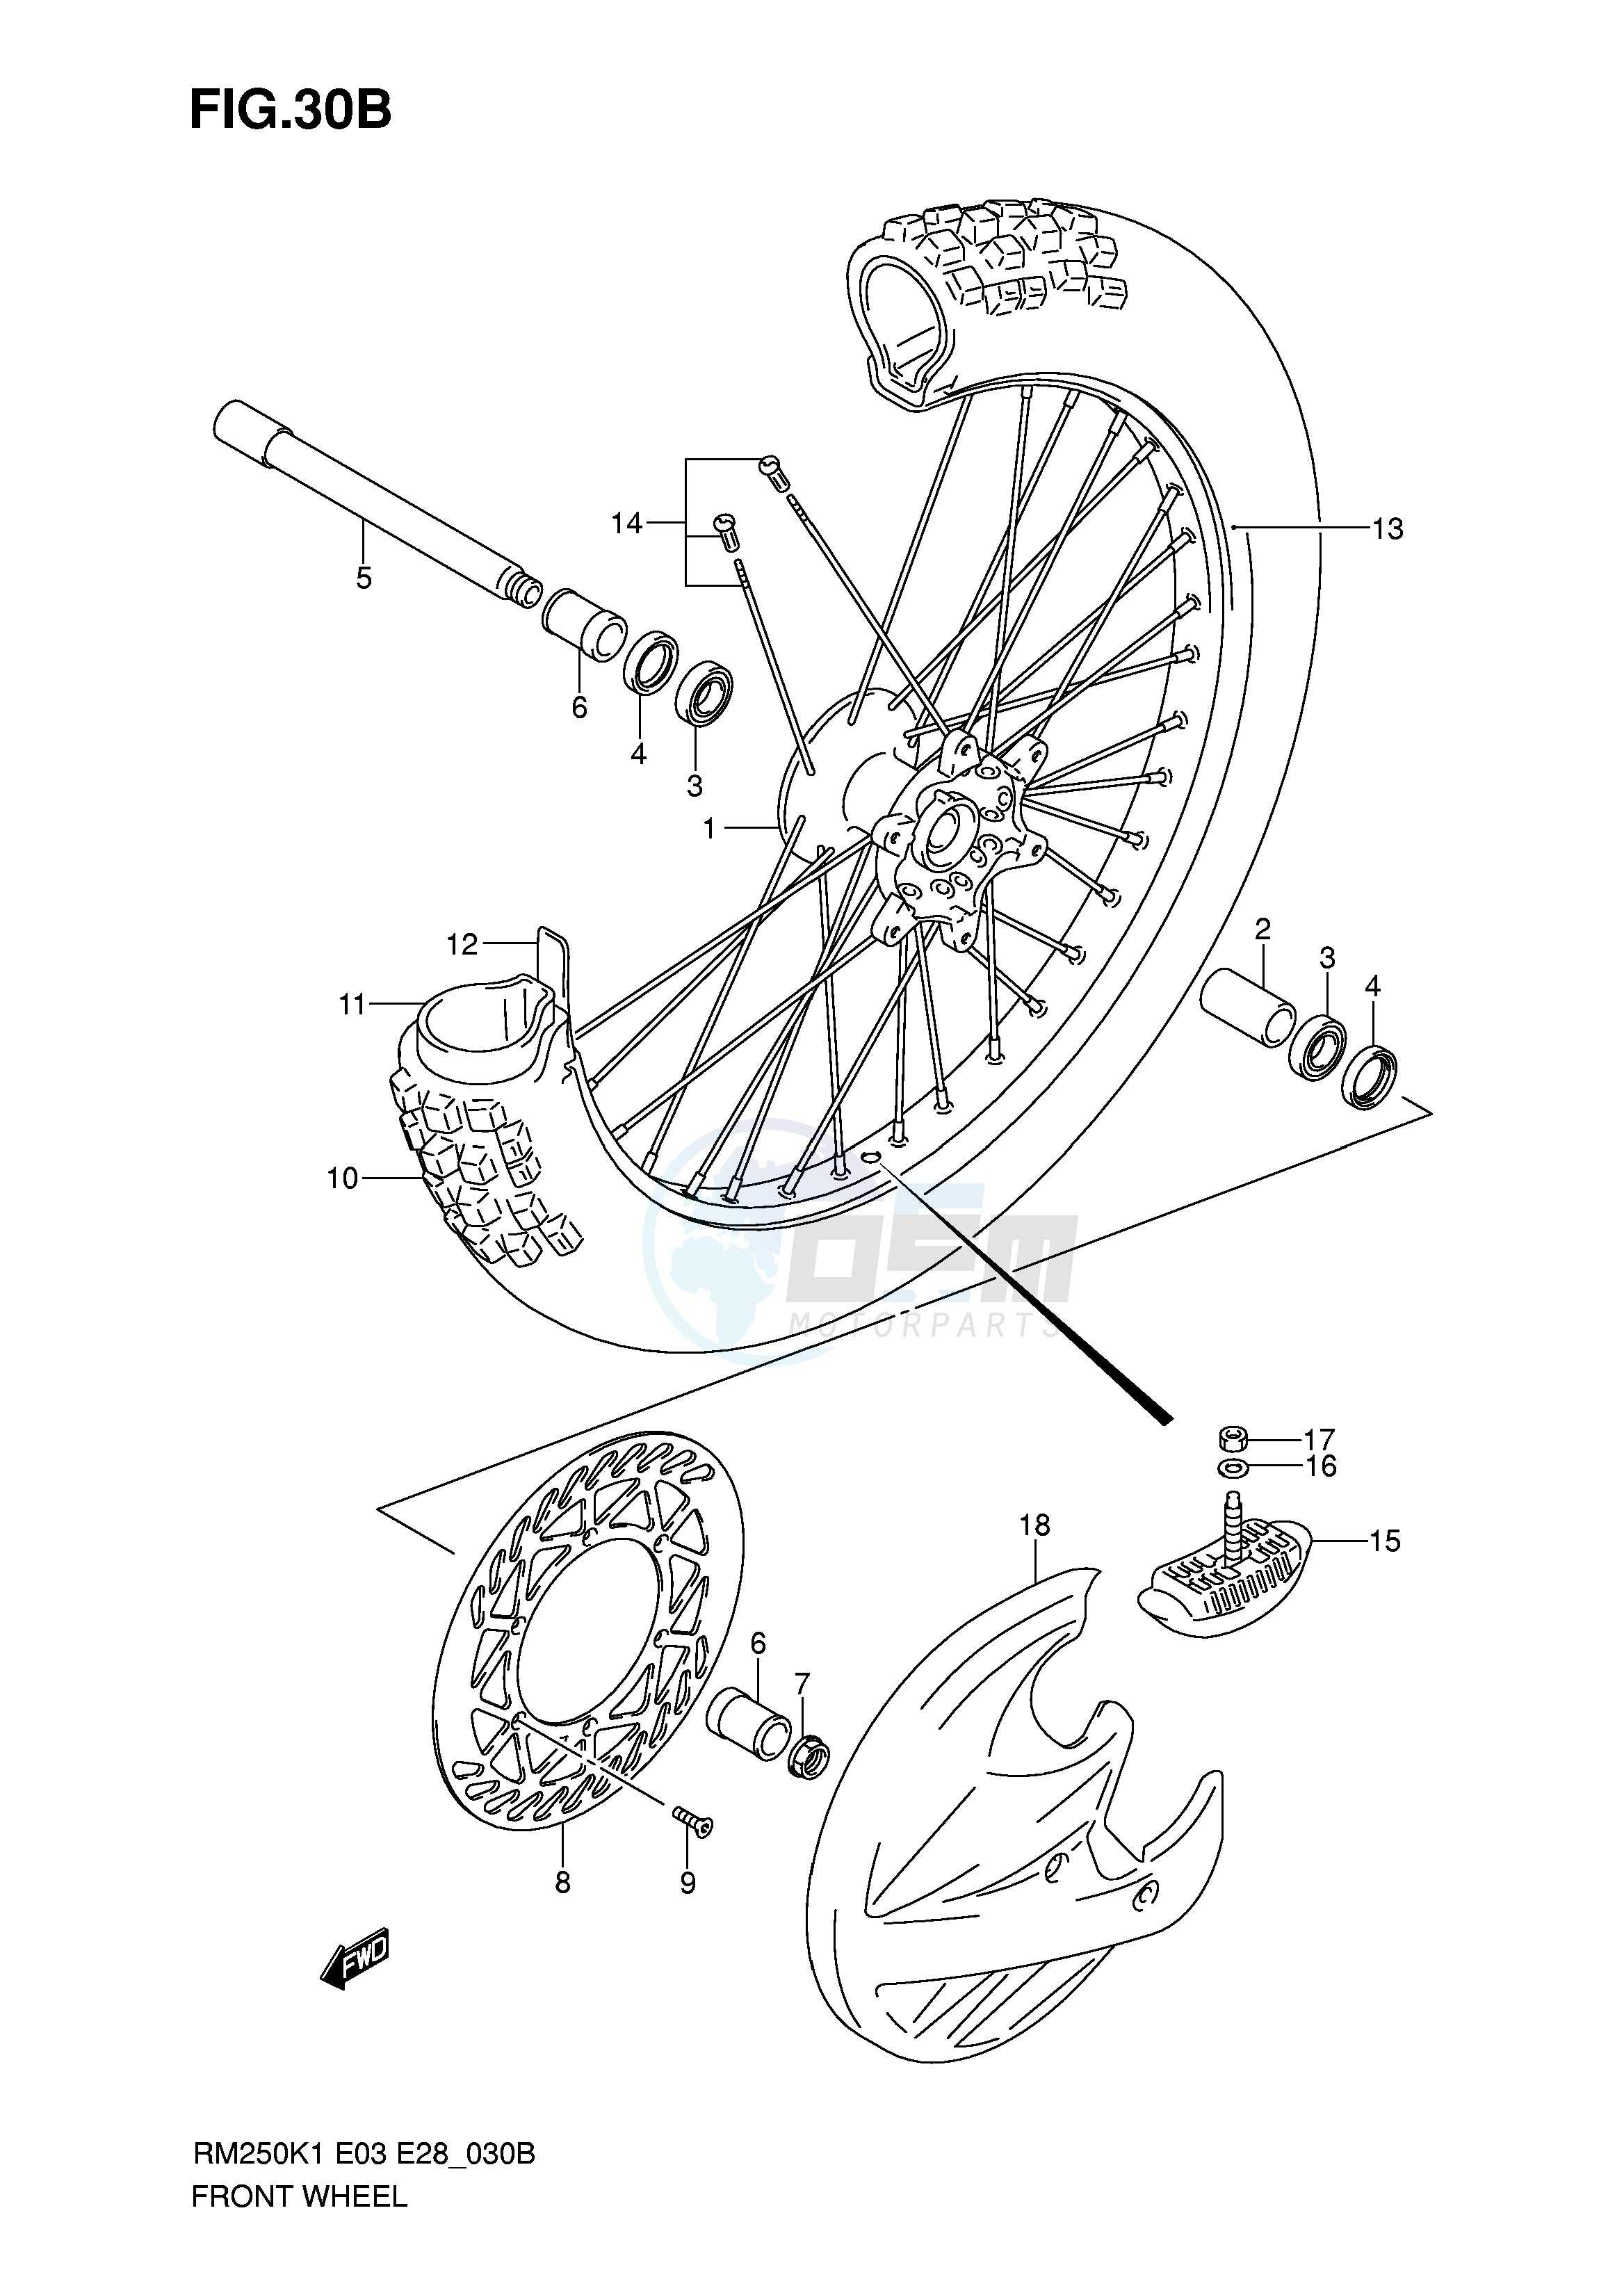 FRONT WHEEL (RM250ZK6) image